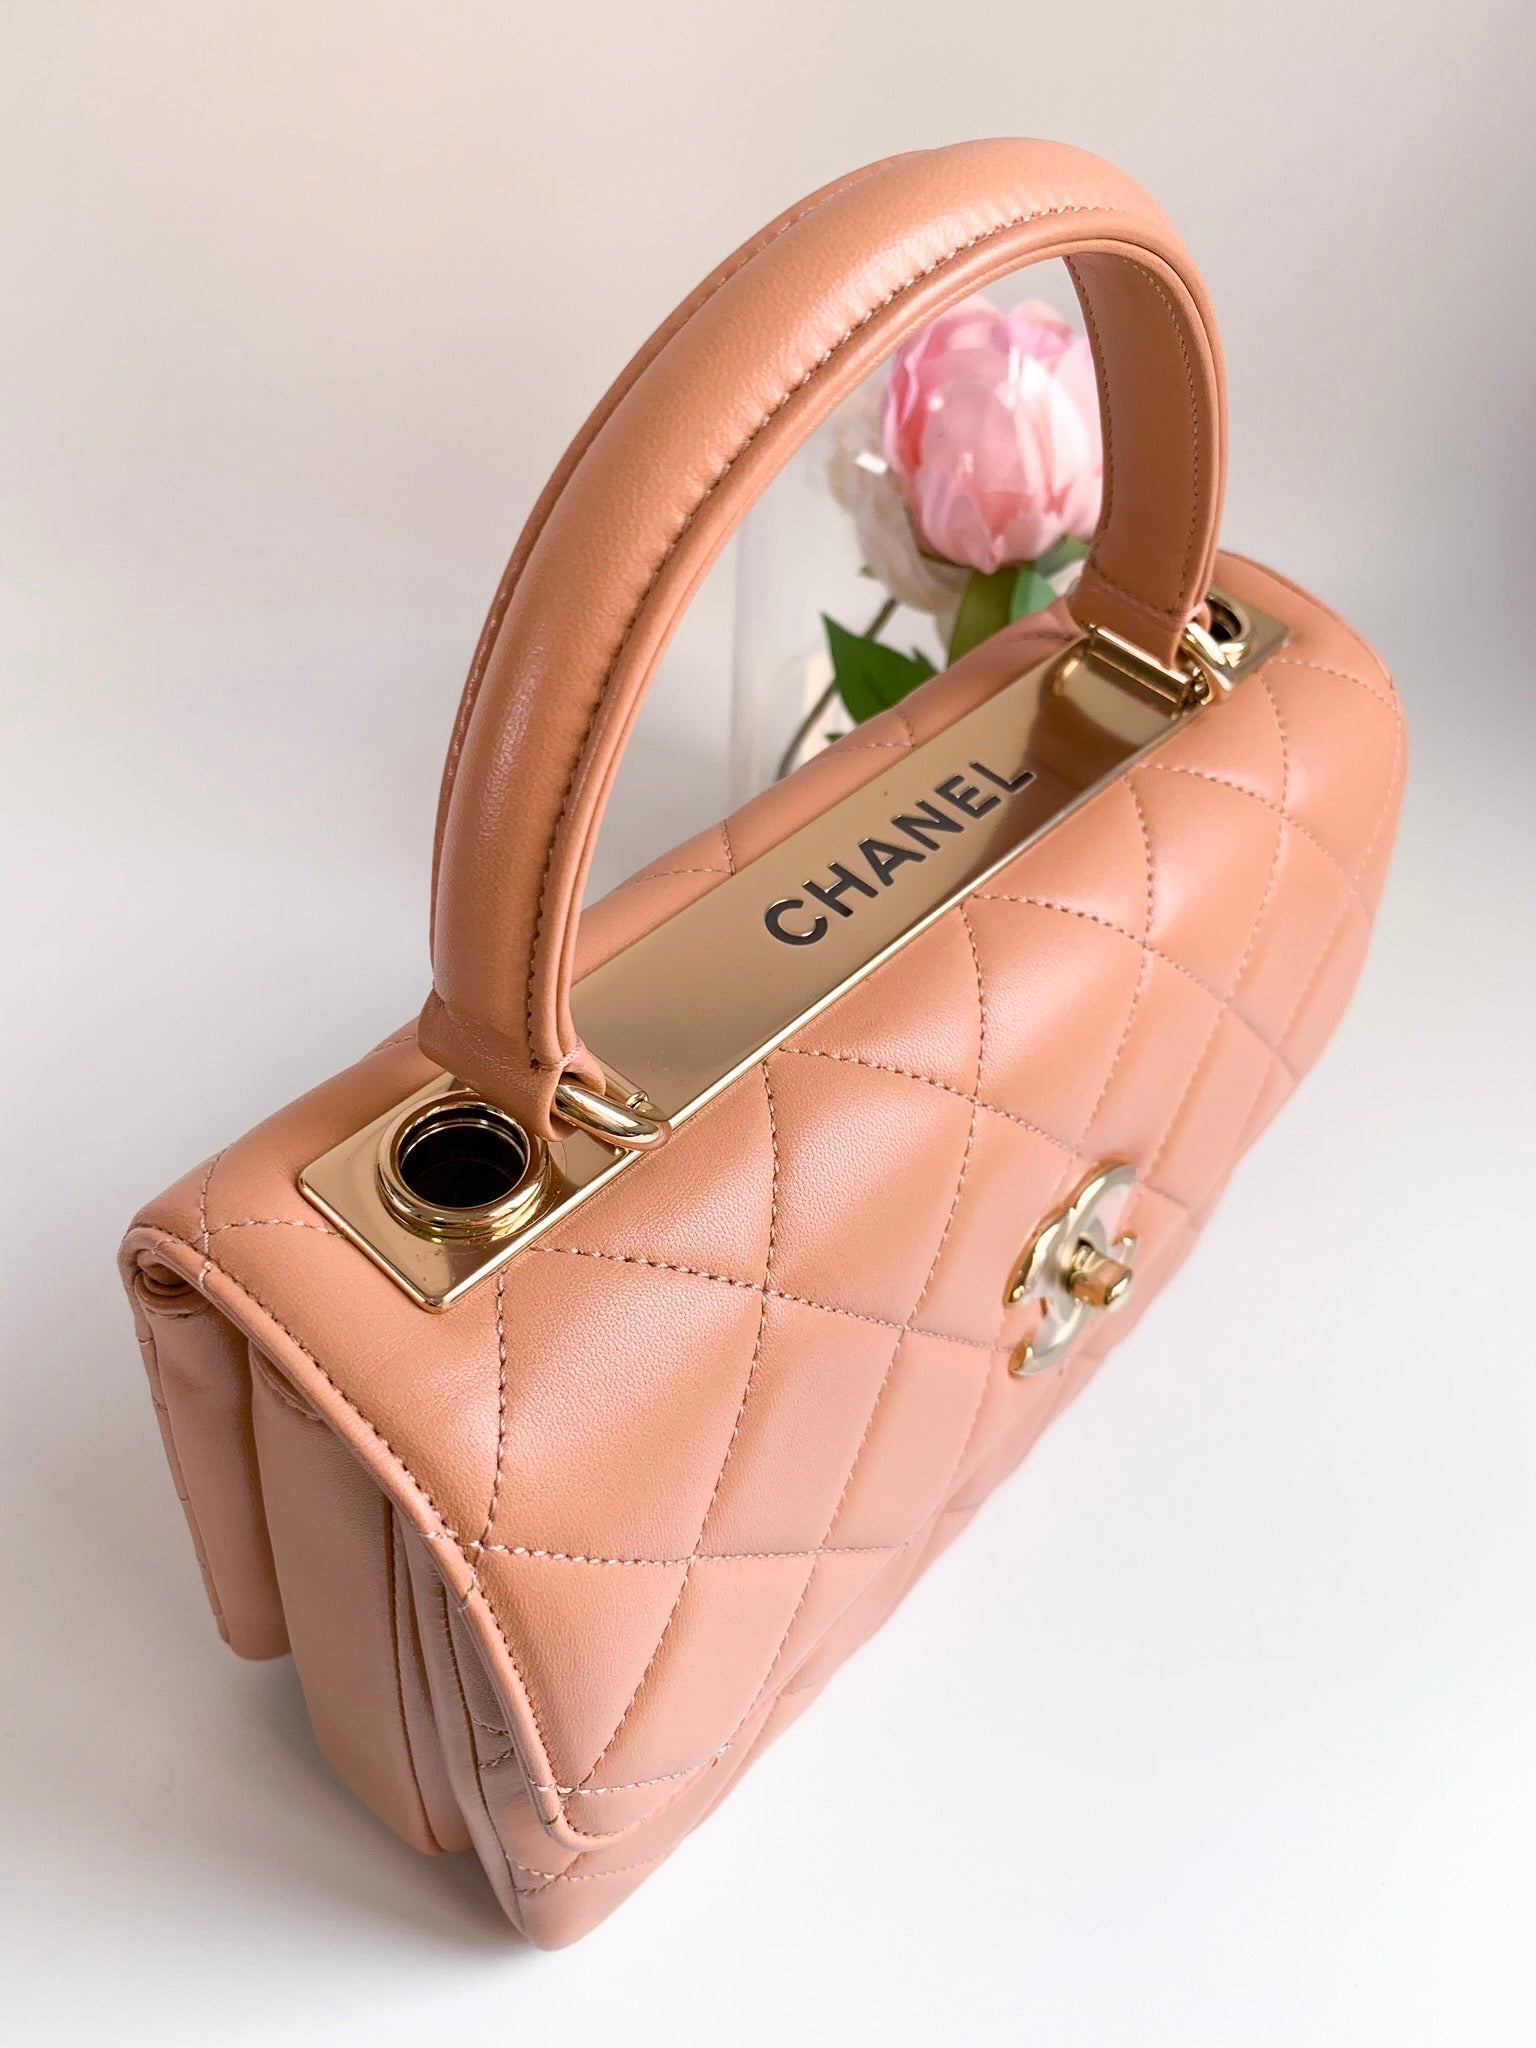 Chanel Lambskin Quilted Small Trendy CC Flap Bag Caramel Beige